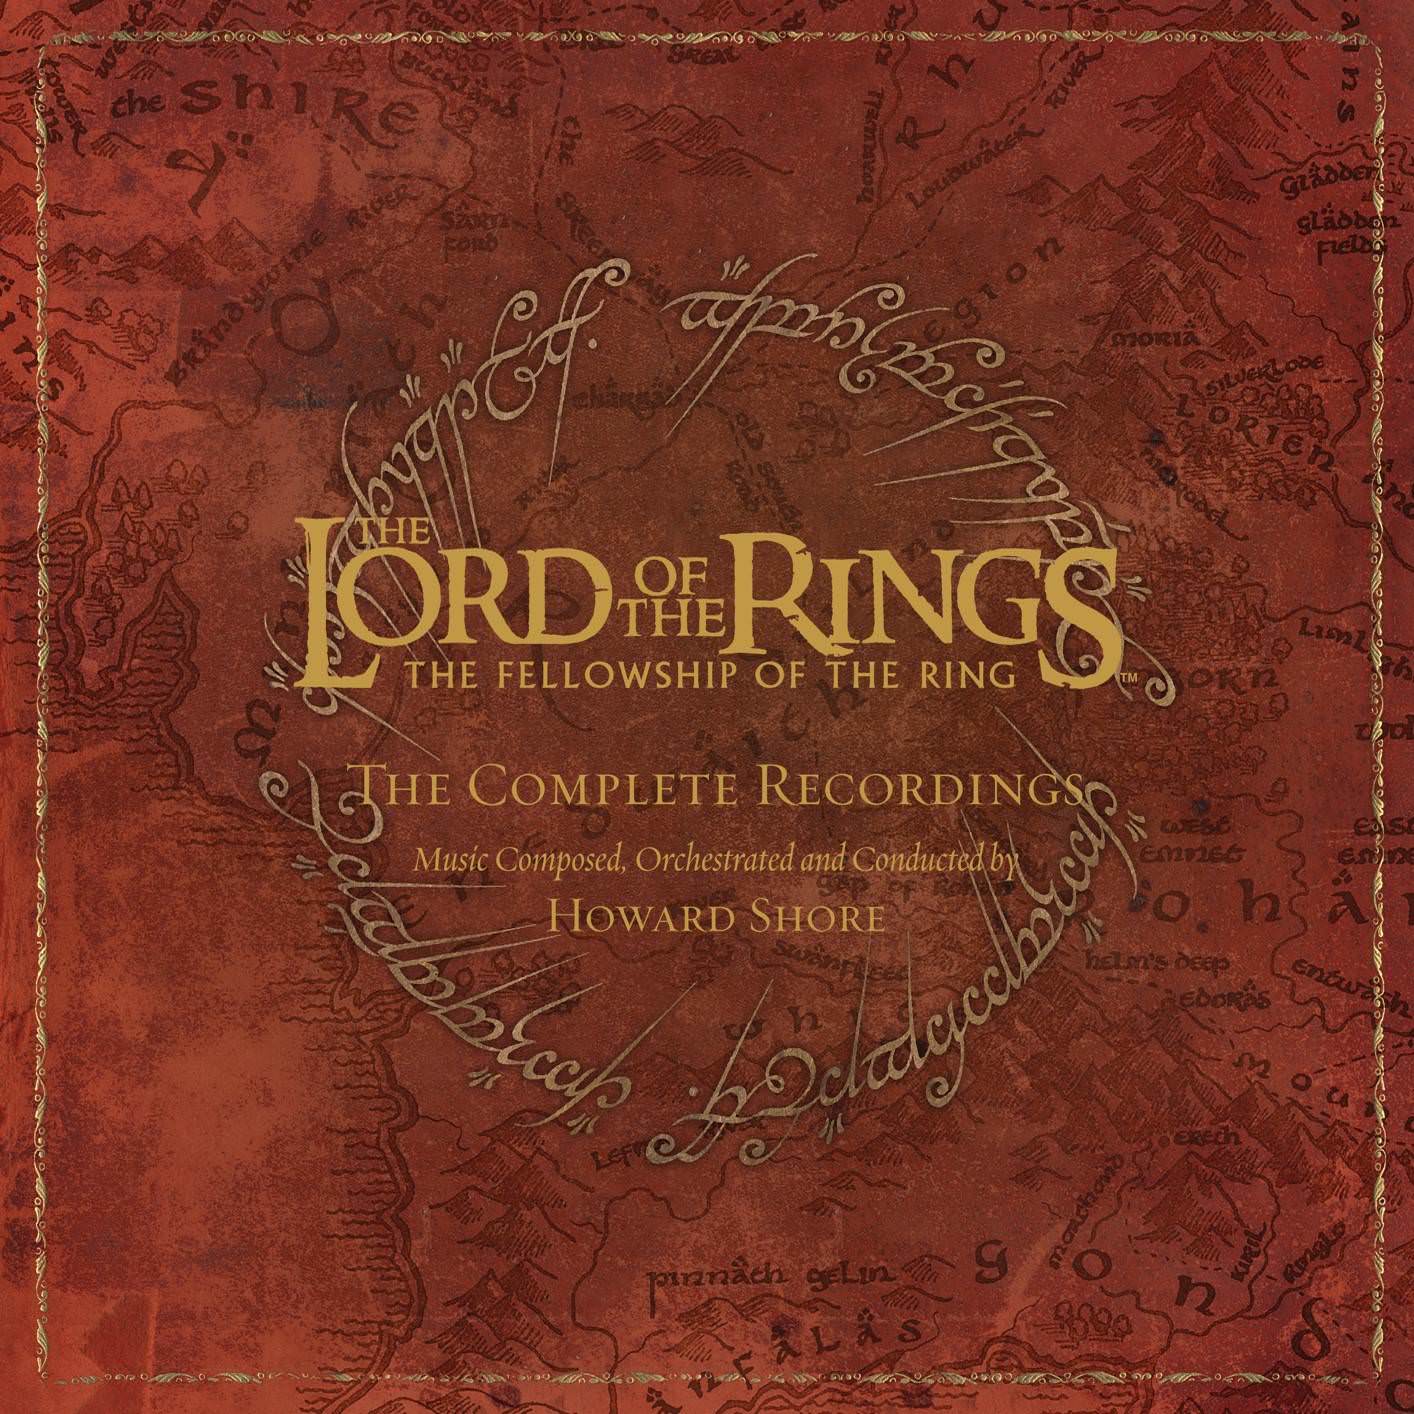 Howard Shore – The Lord Of The Rings: The Fellowship Of The Ring – The Complete Recordings (2005/2018) [FLAC 24bit/48kHz]